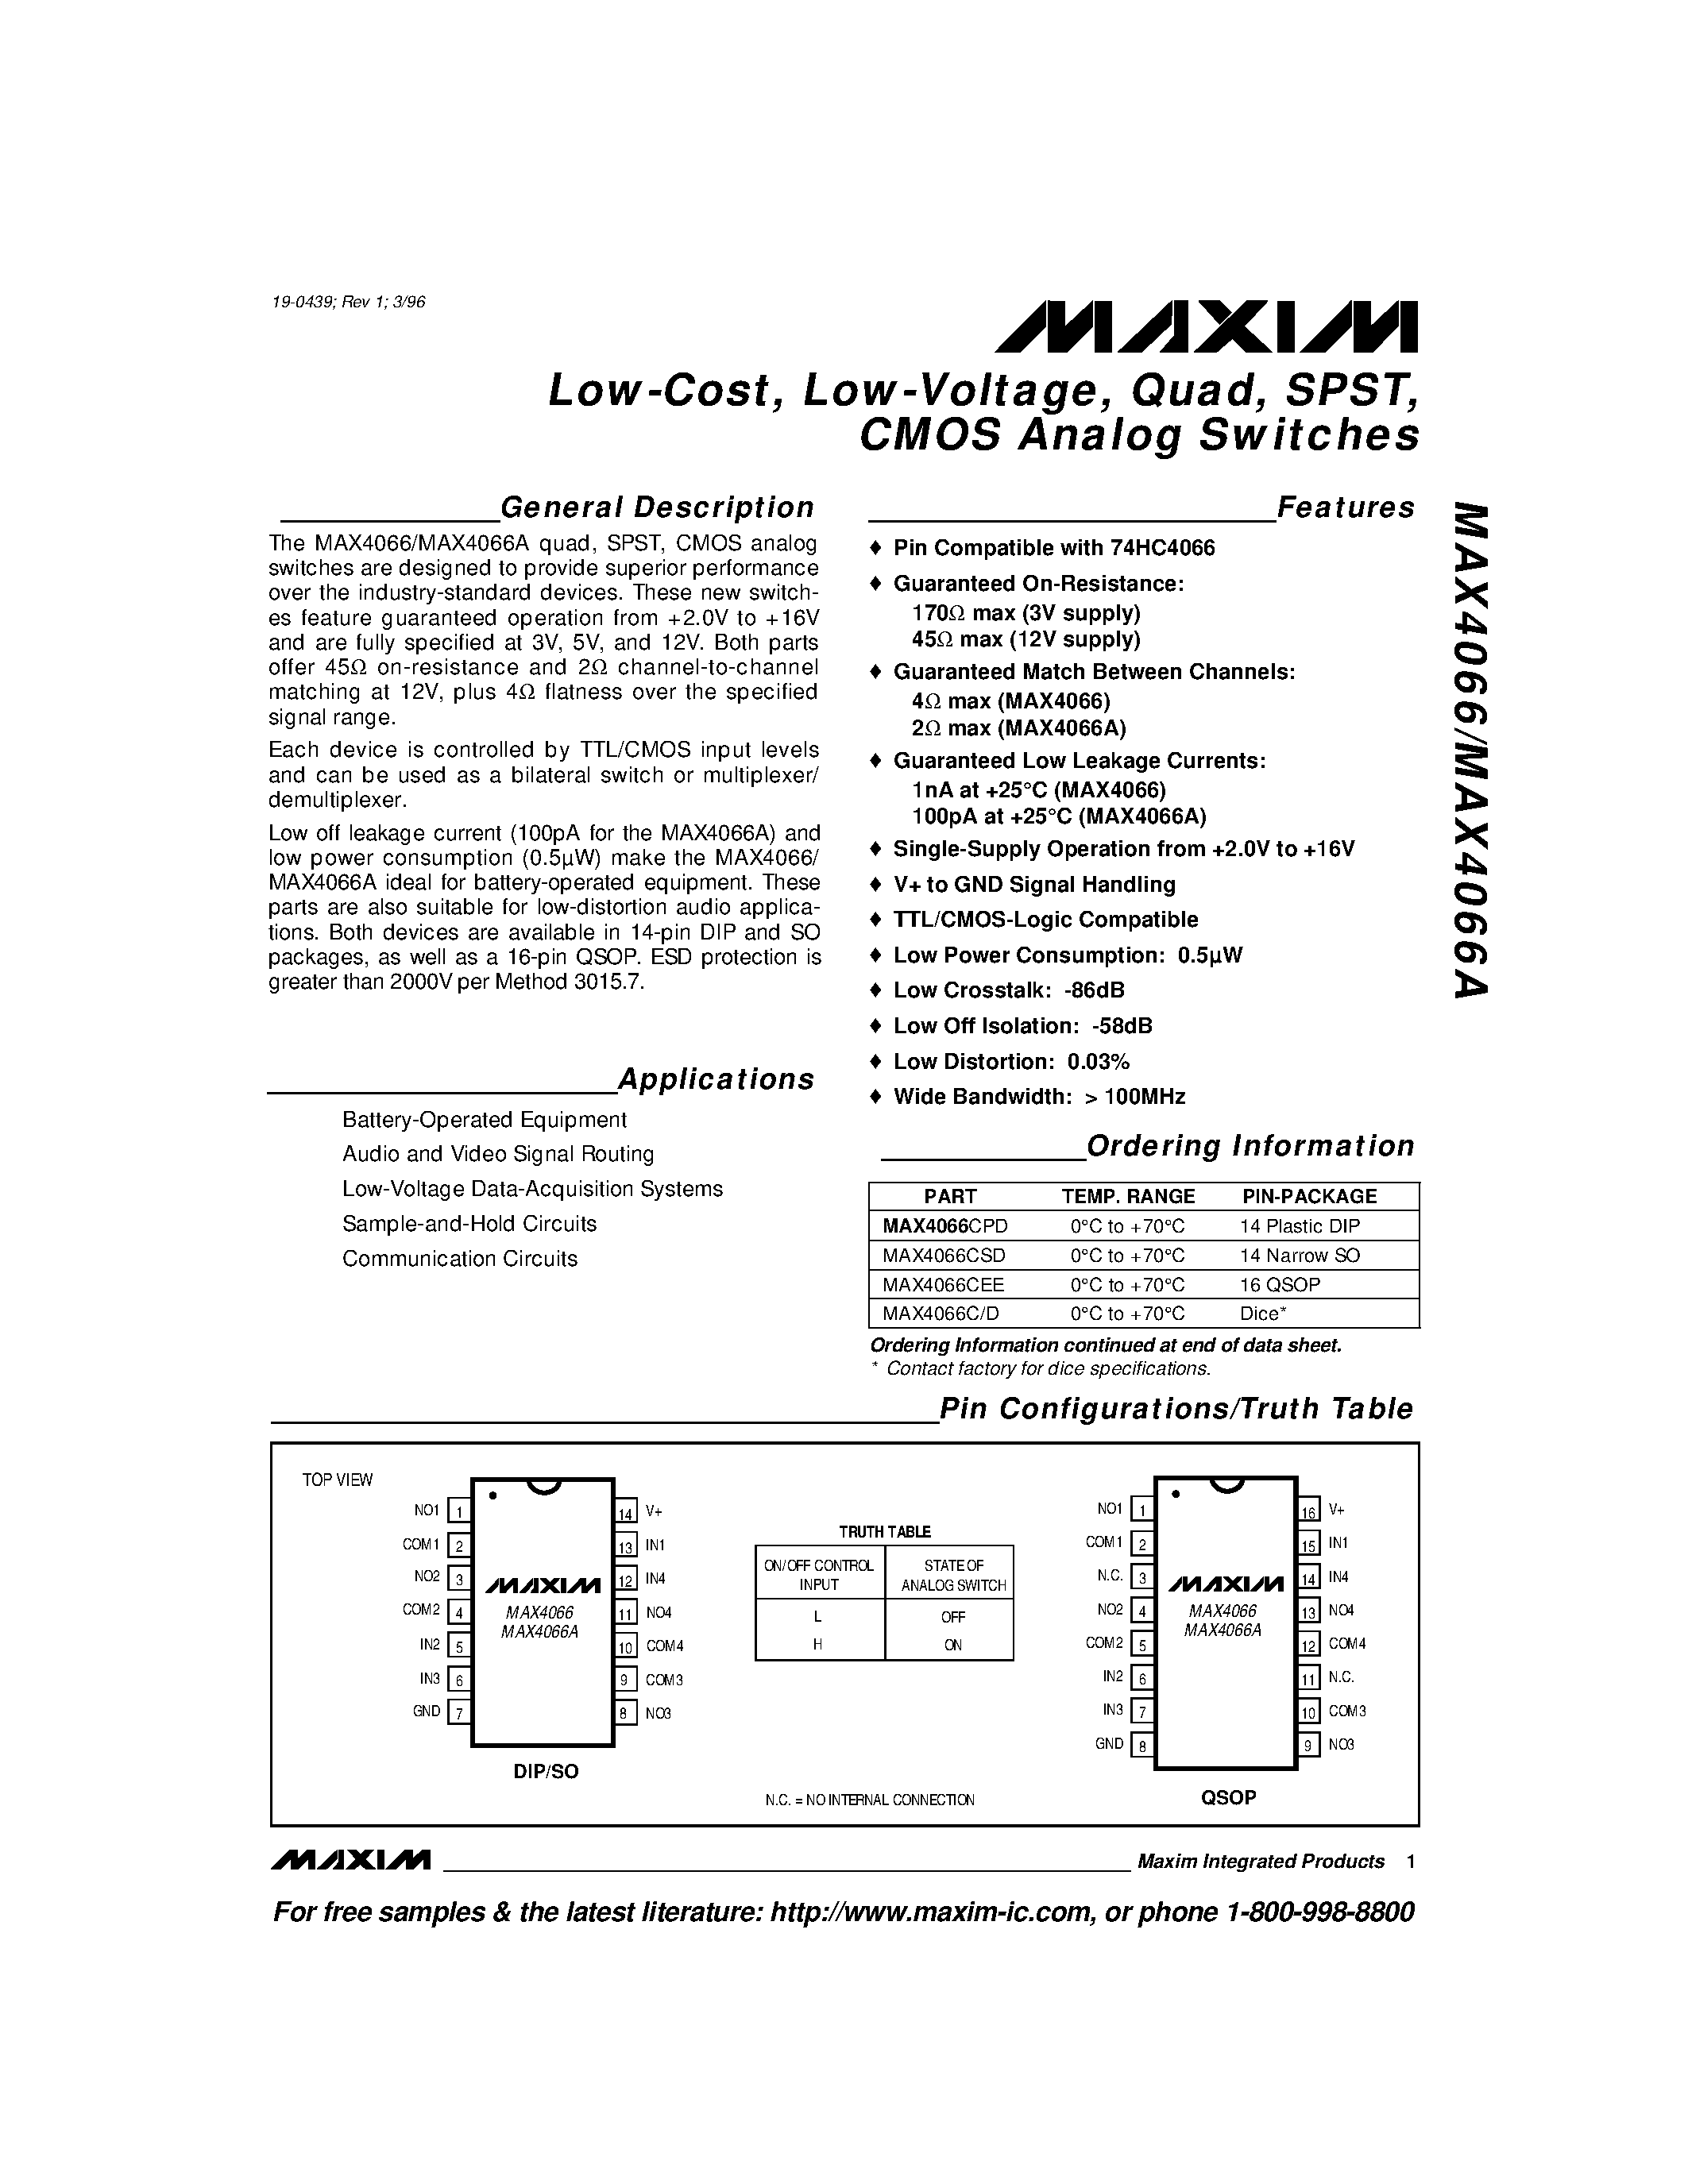 Datasheet 4066 - Low-Cost/ Low-Voltage/ Quad/ SPST/ CMOS Analog Switches page 1